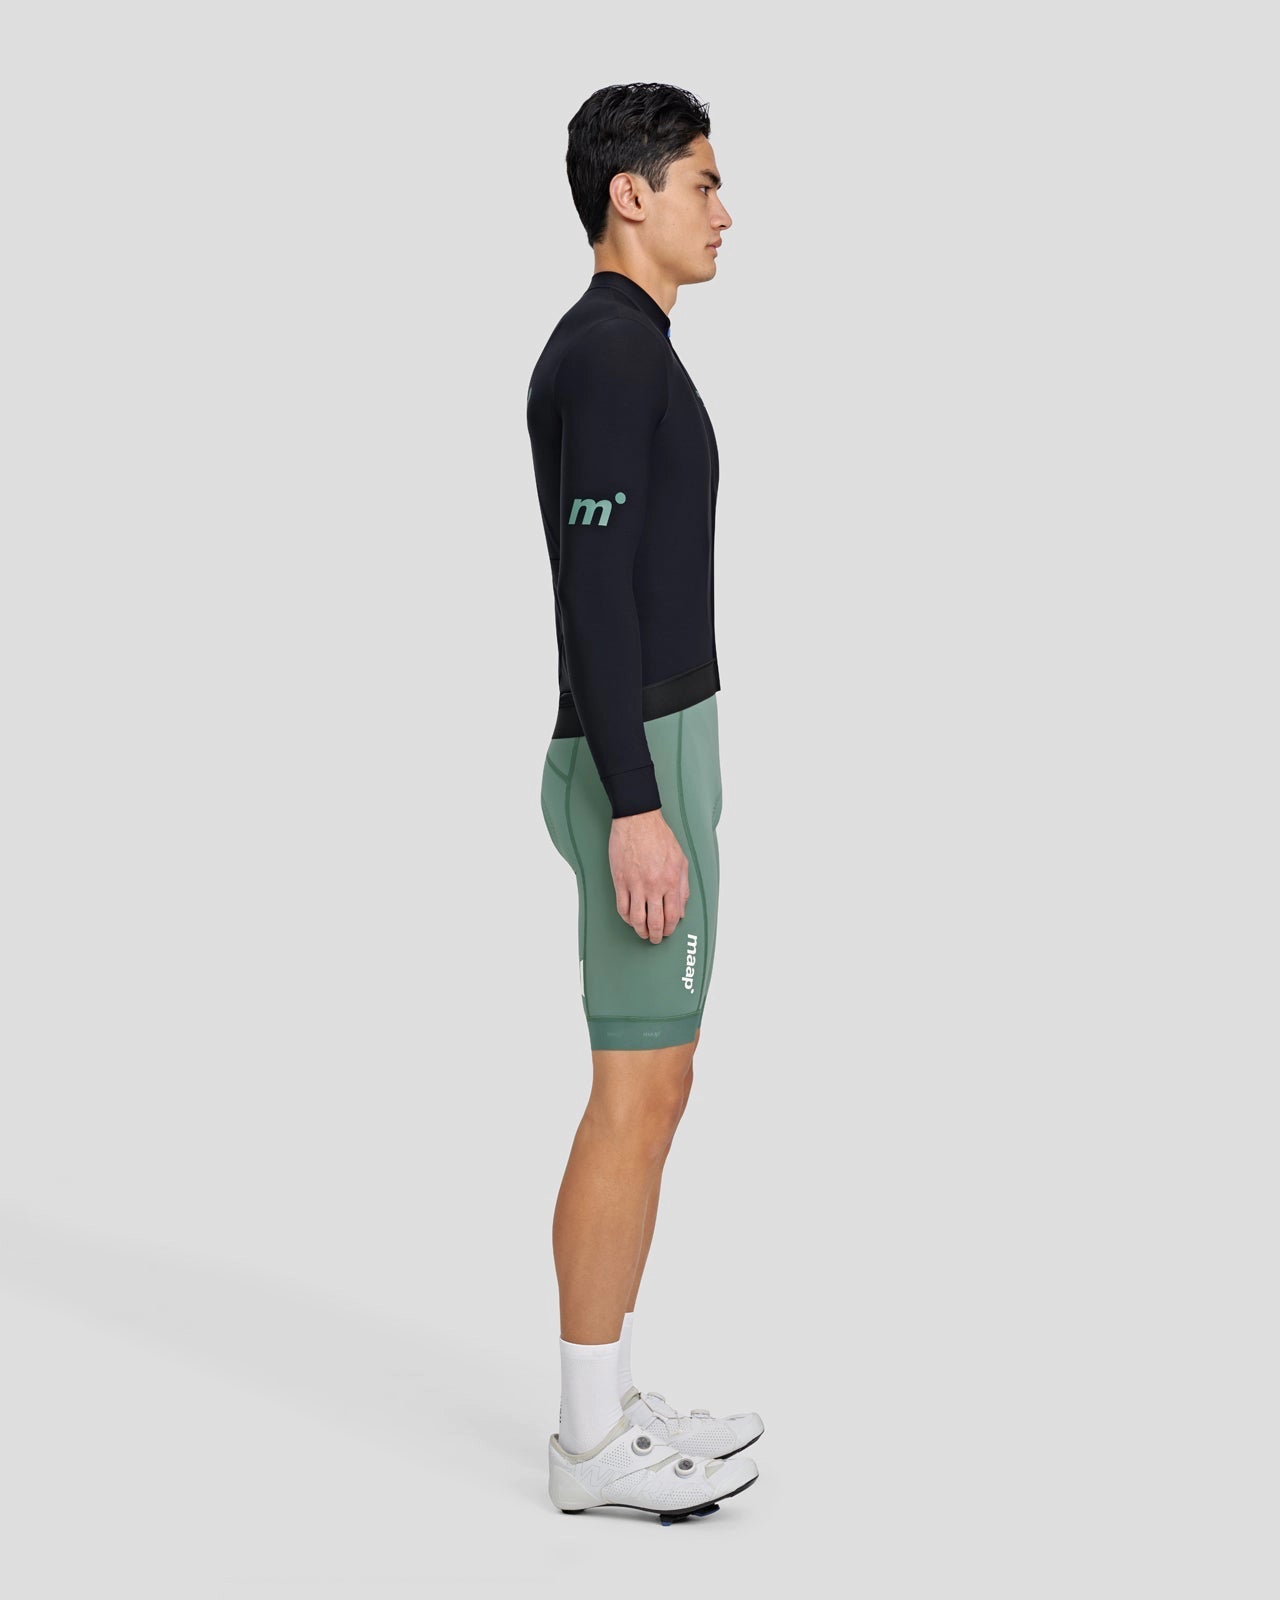 MAAP Thermal Training Jersey